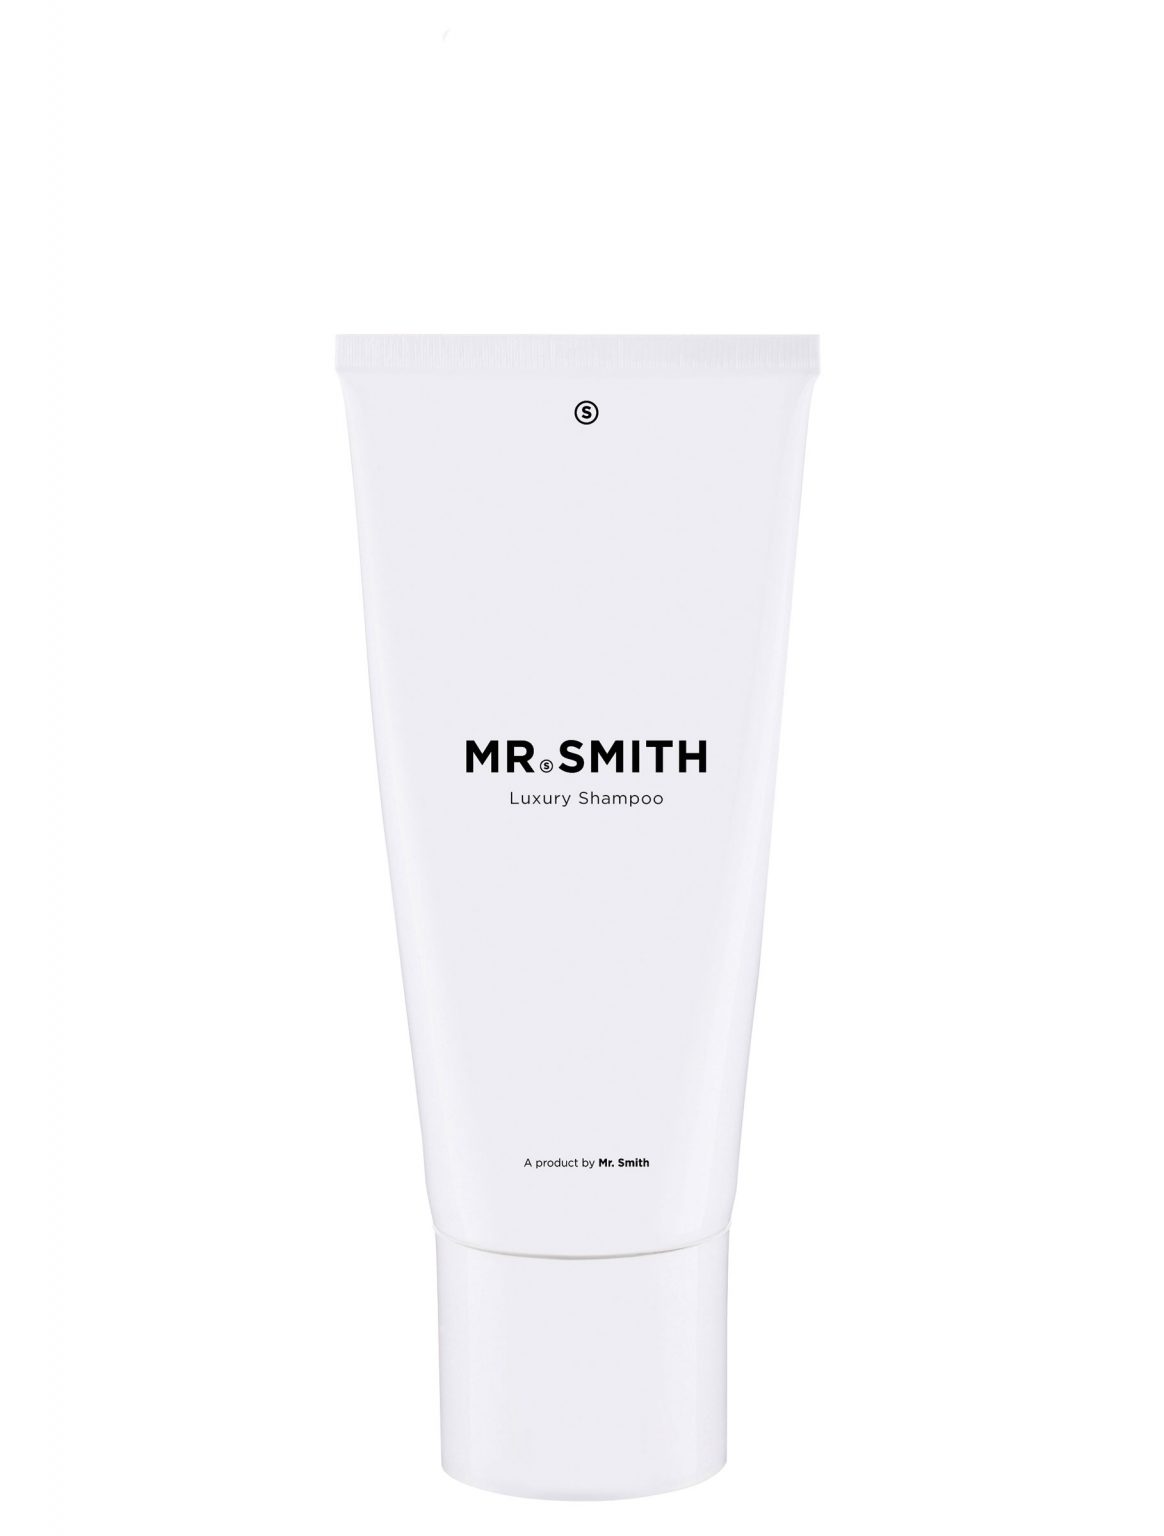 mr smith hair products